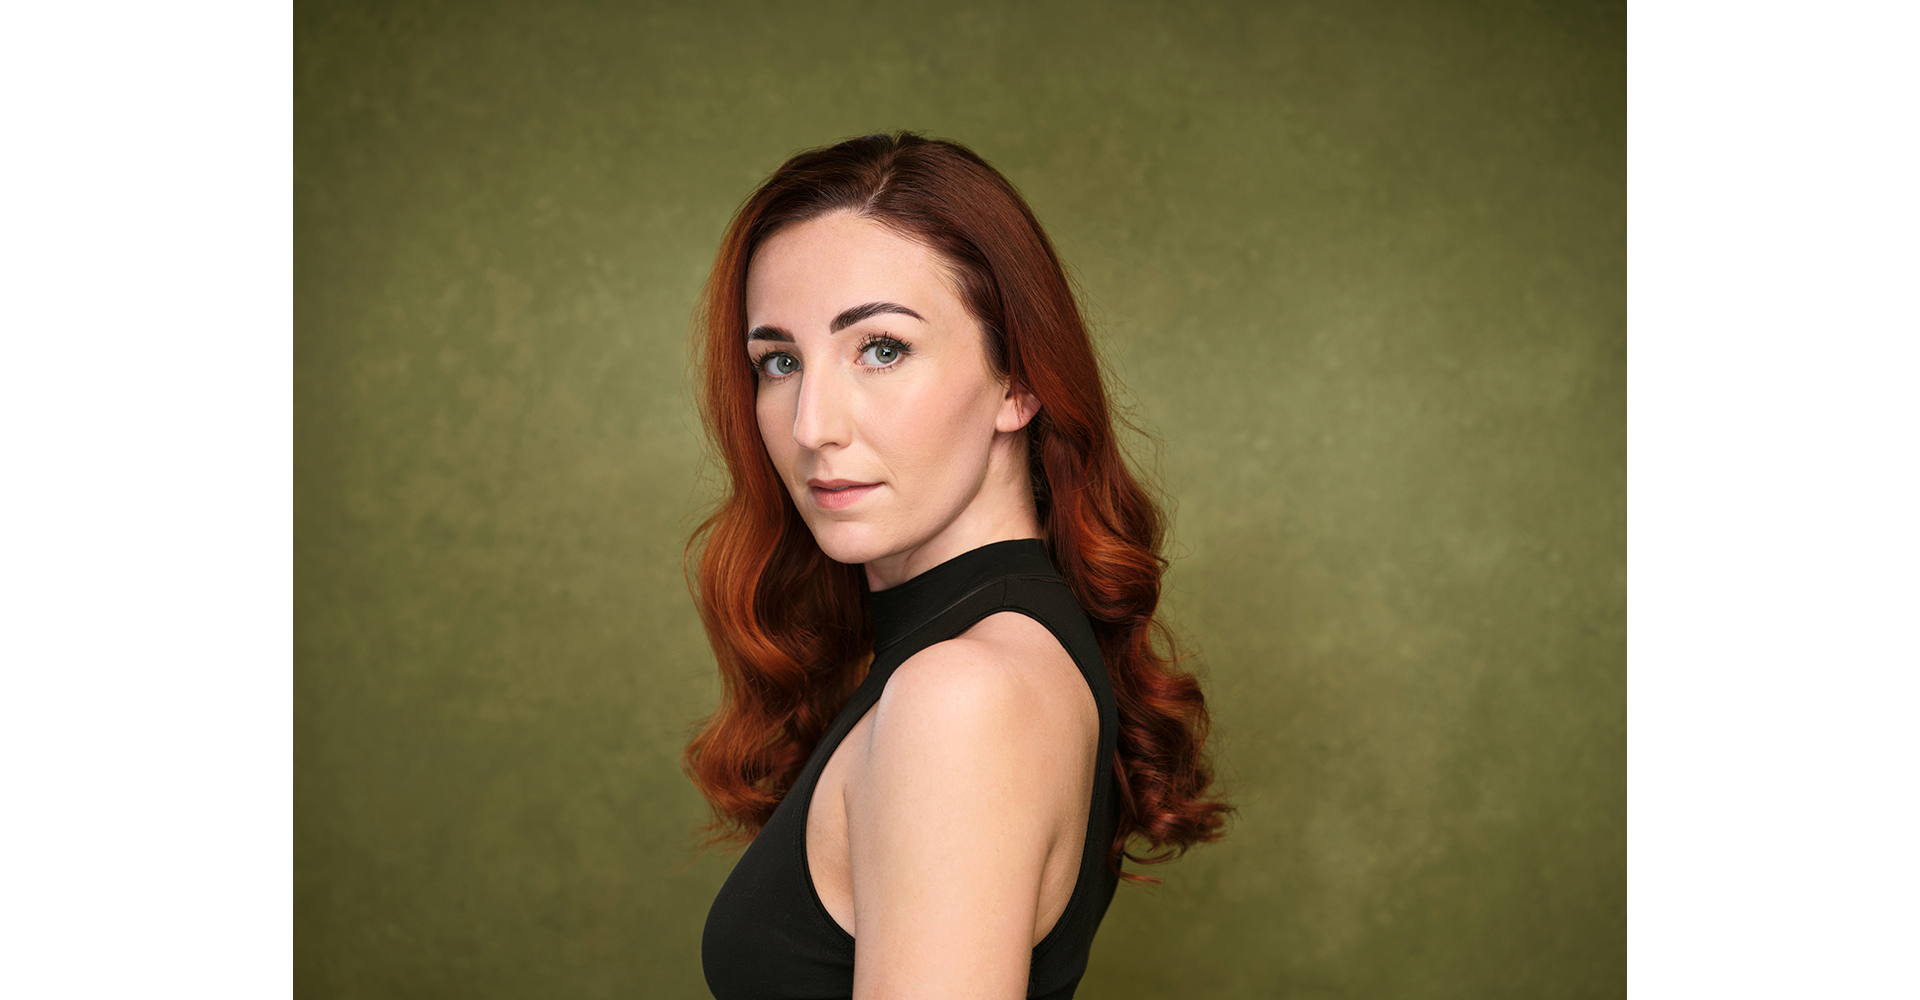 actress  black top with red hair standing front of a green painted canvas backdrop